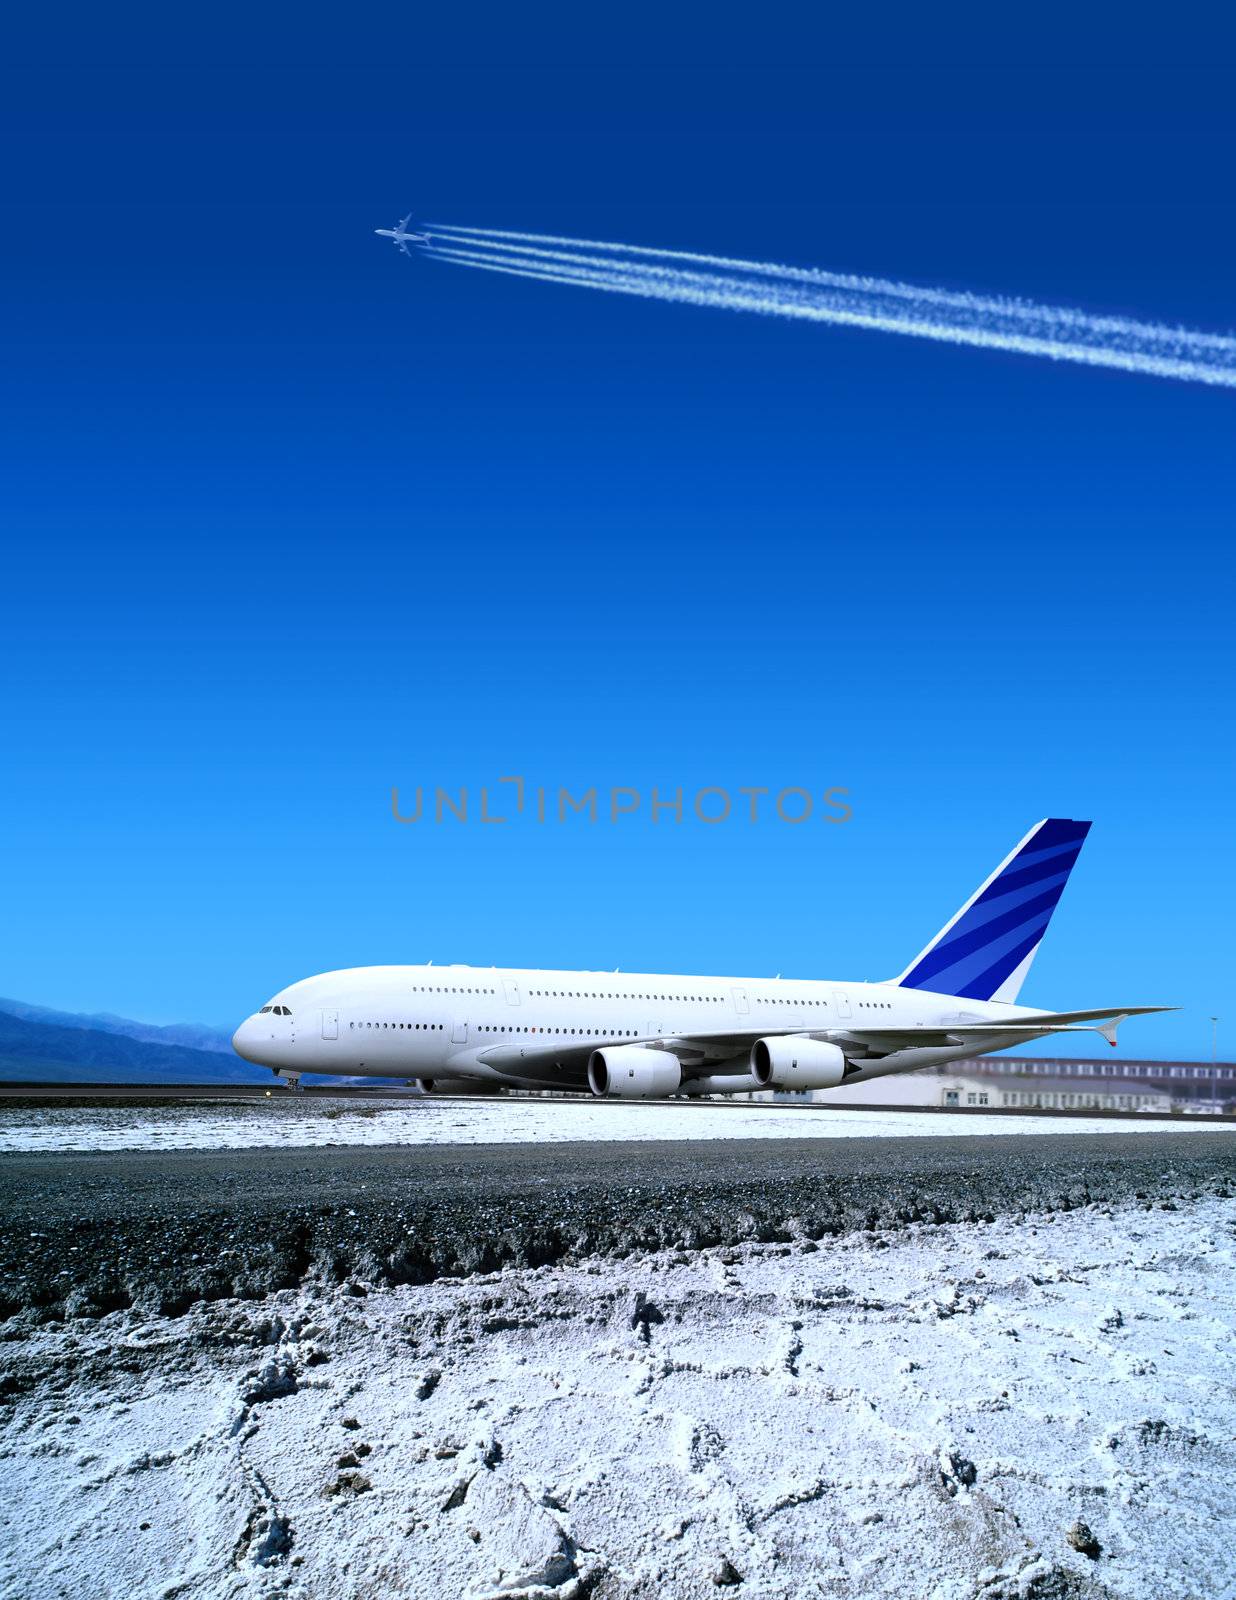 airport and the big plane in winter time